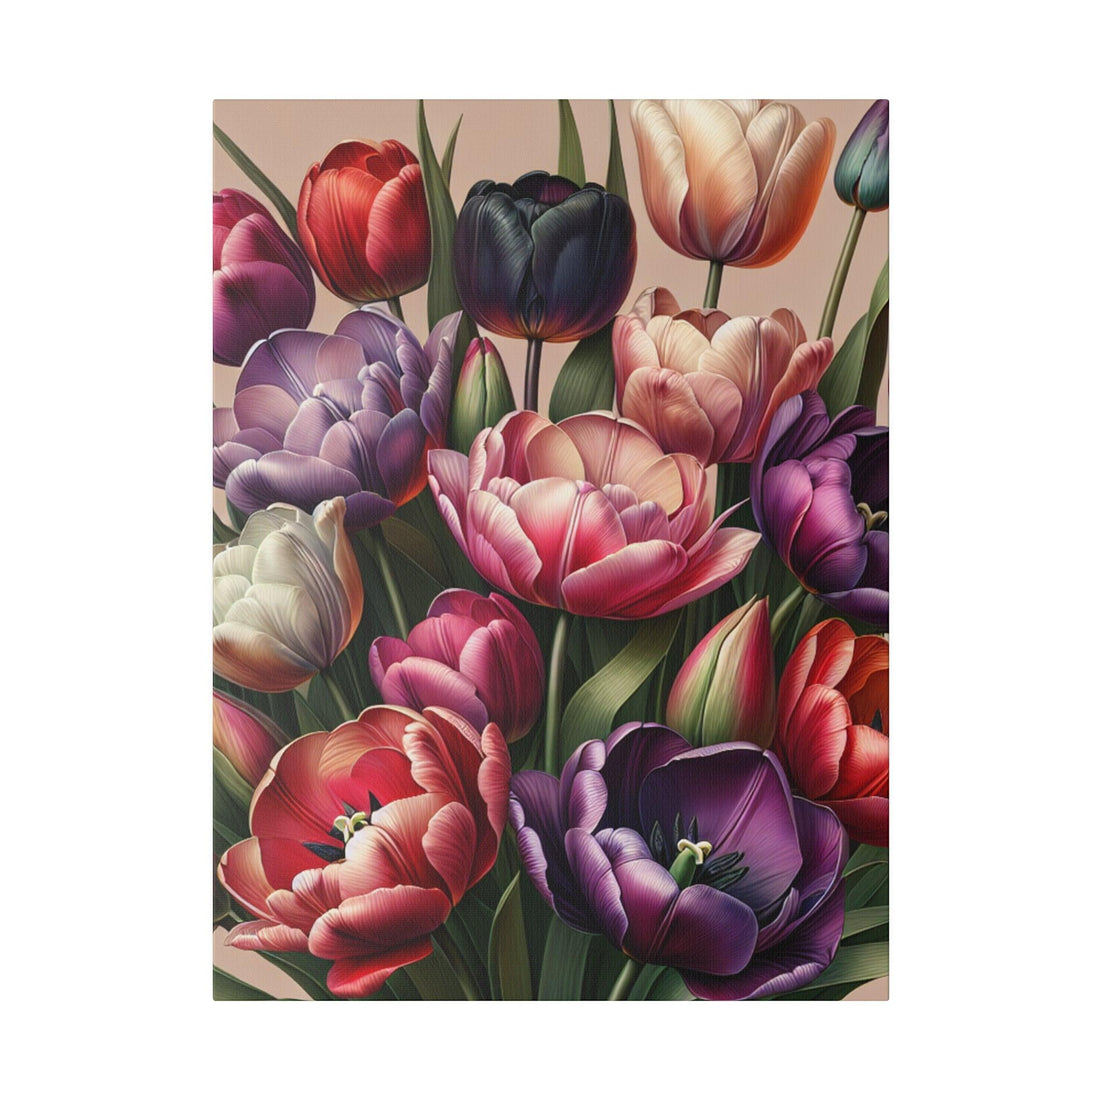 "Blooming Elegance: Tulip Symphony Canvas Wall Art" - The Alice Gallery